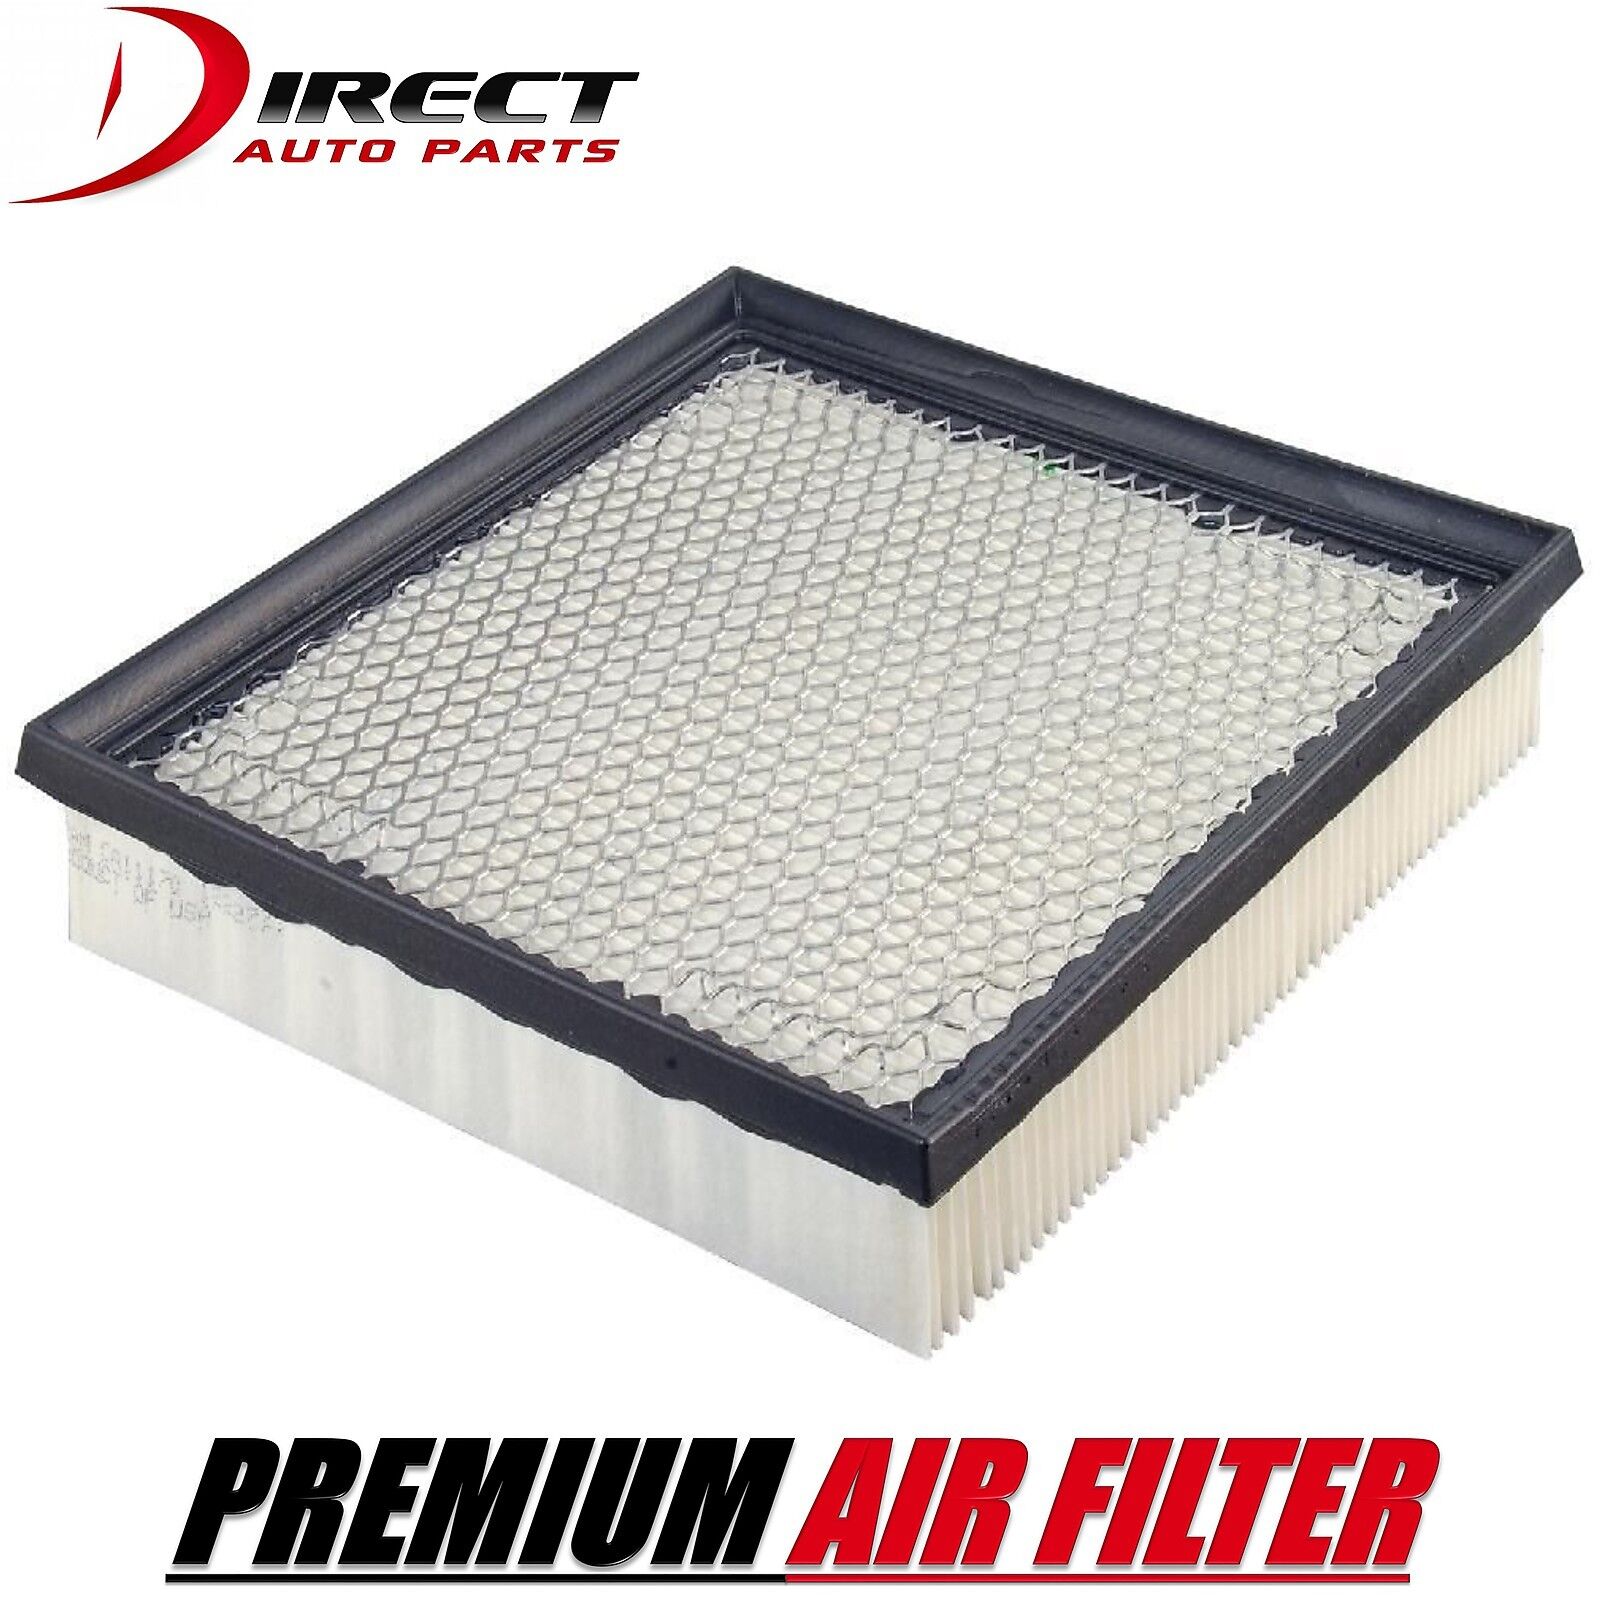 MERCURY AIR FILTER FOR MERCURY MOUNTAINEER V8 5.0L ENGINE 1997 - 2001